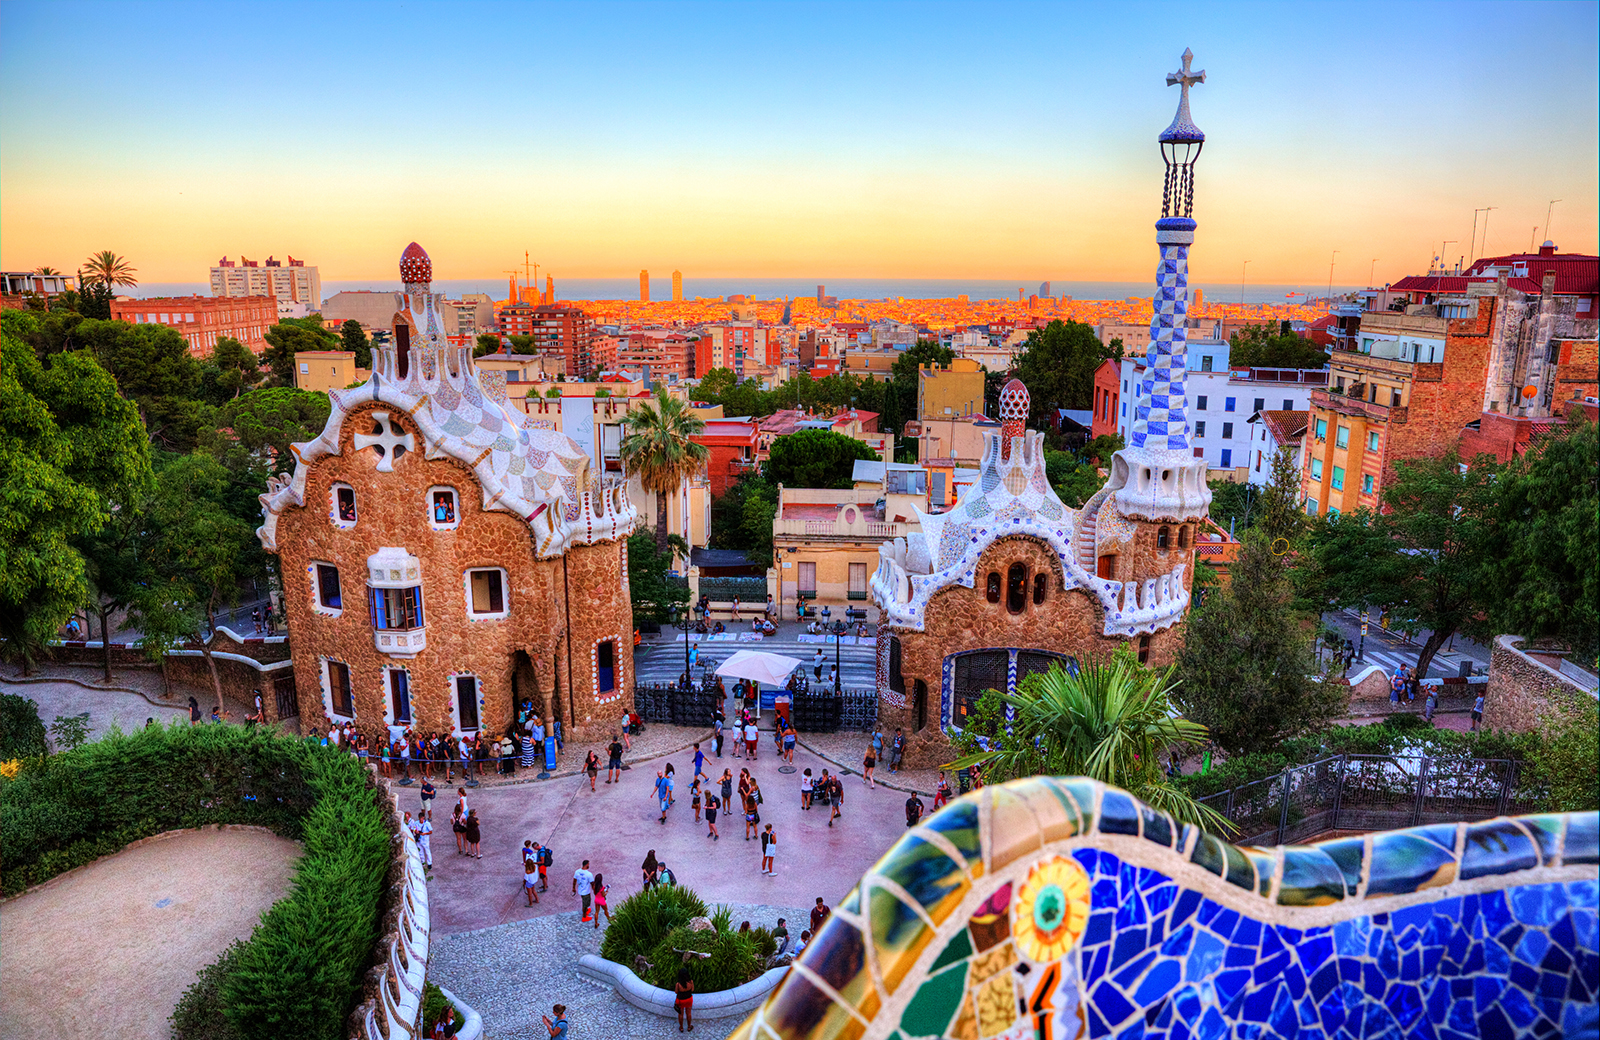 Spain-Barcelona-Gaudi-Parque-Guell-with-City-in-background-sunset